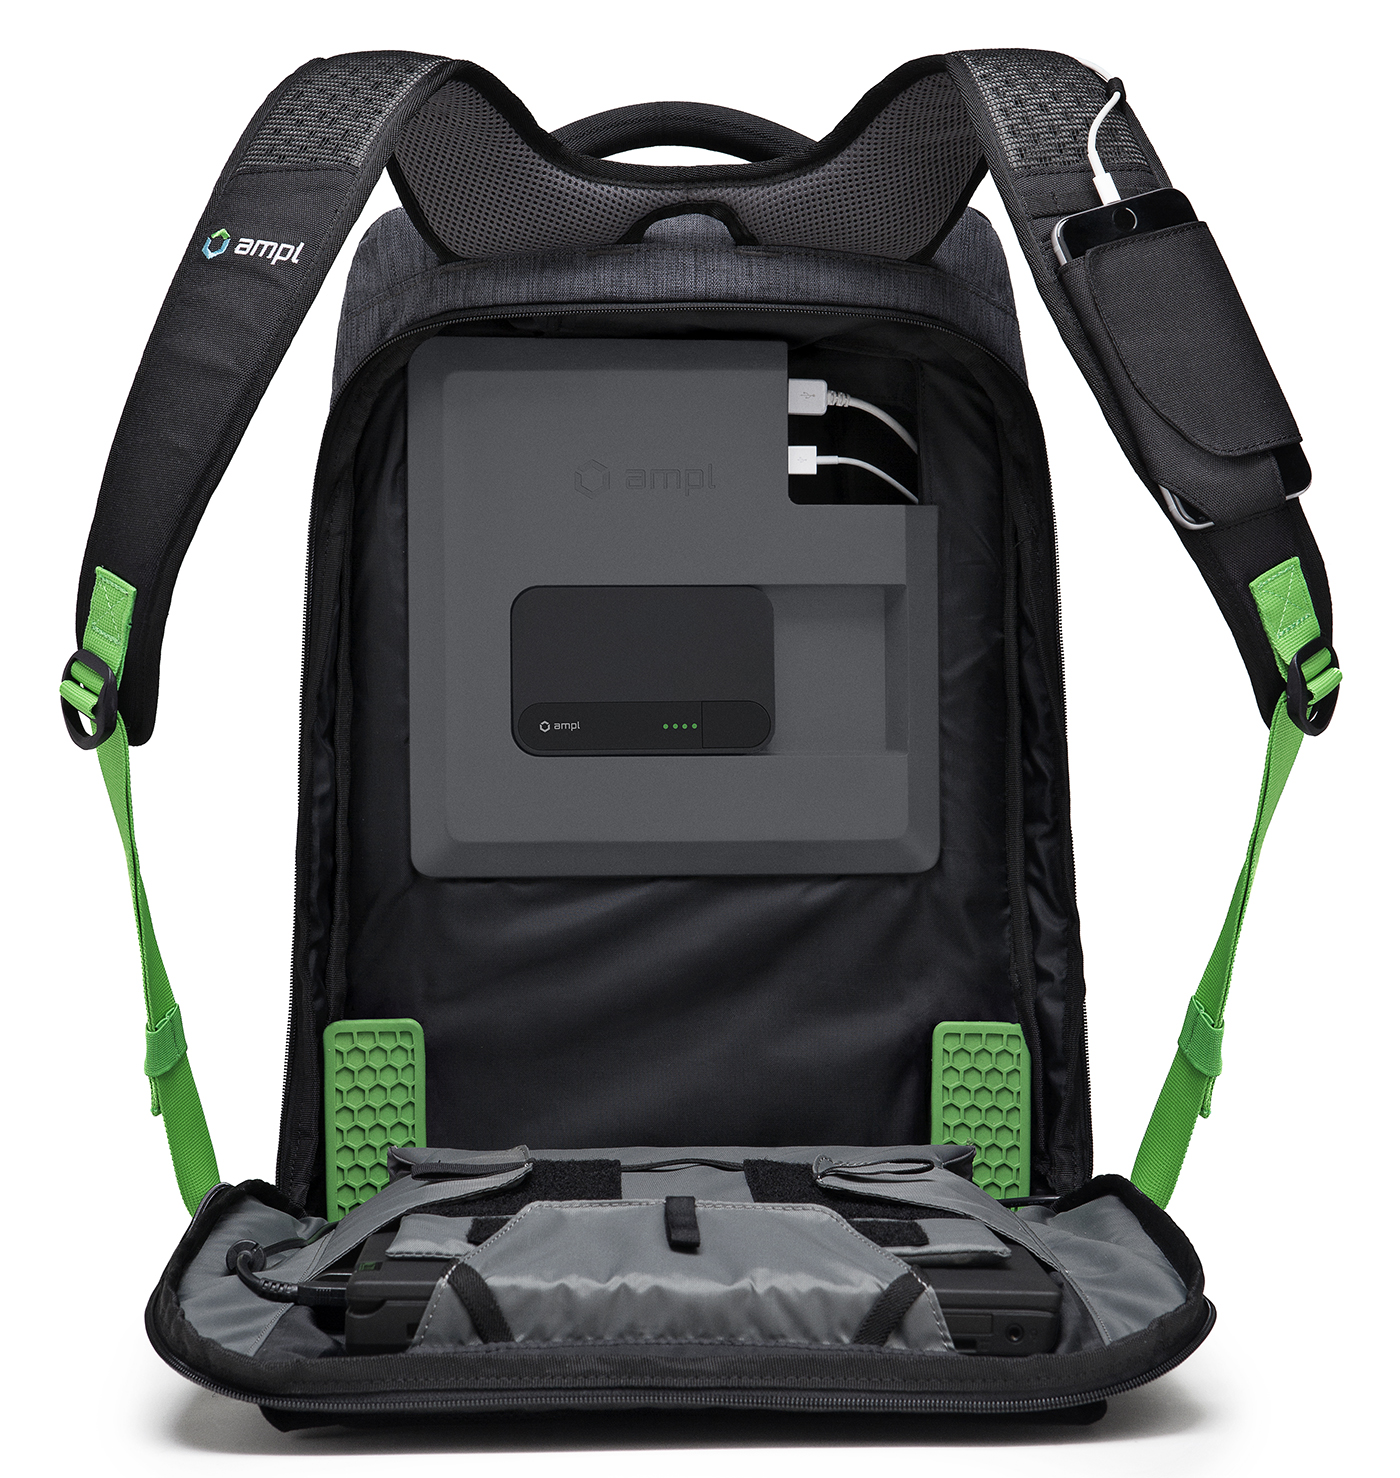 The AMPL SmartBag carries a USB port in every pocket to charge all your ...